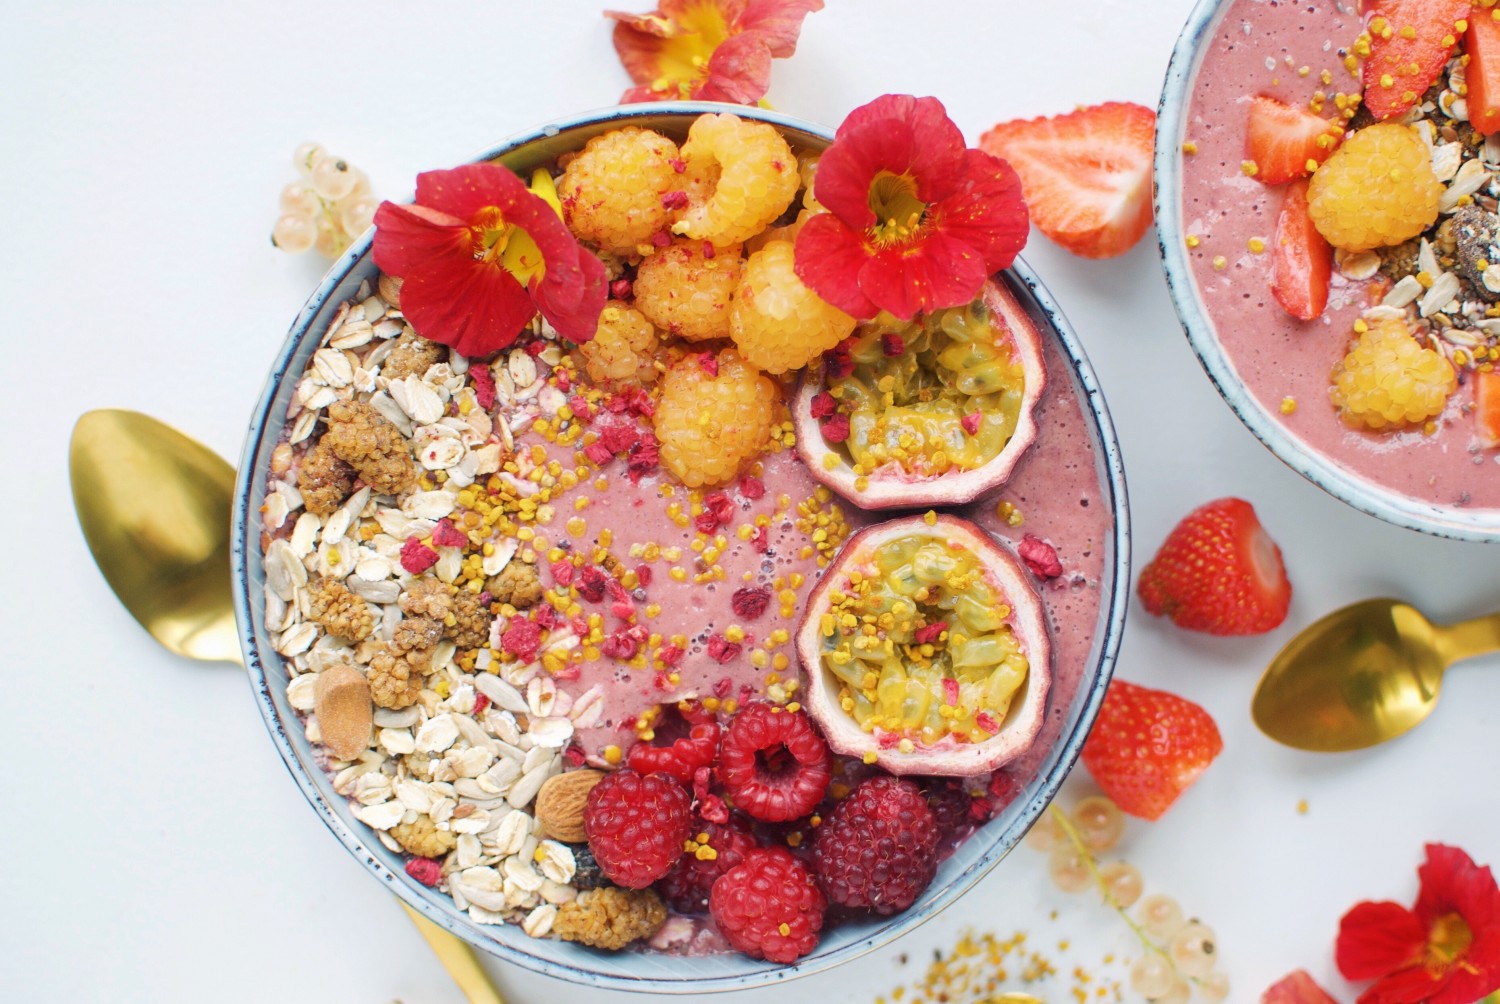 Raspberry smoothie bowls with ginger and zucchini